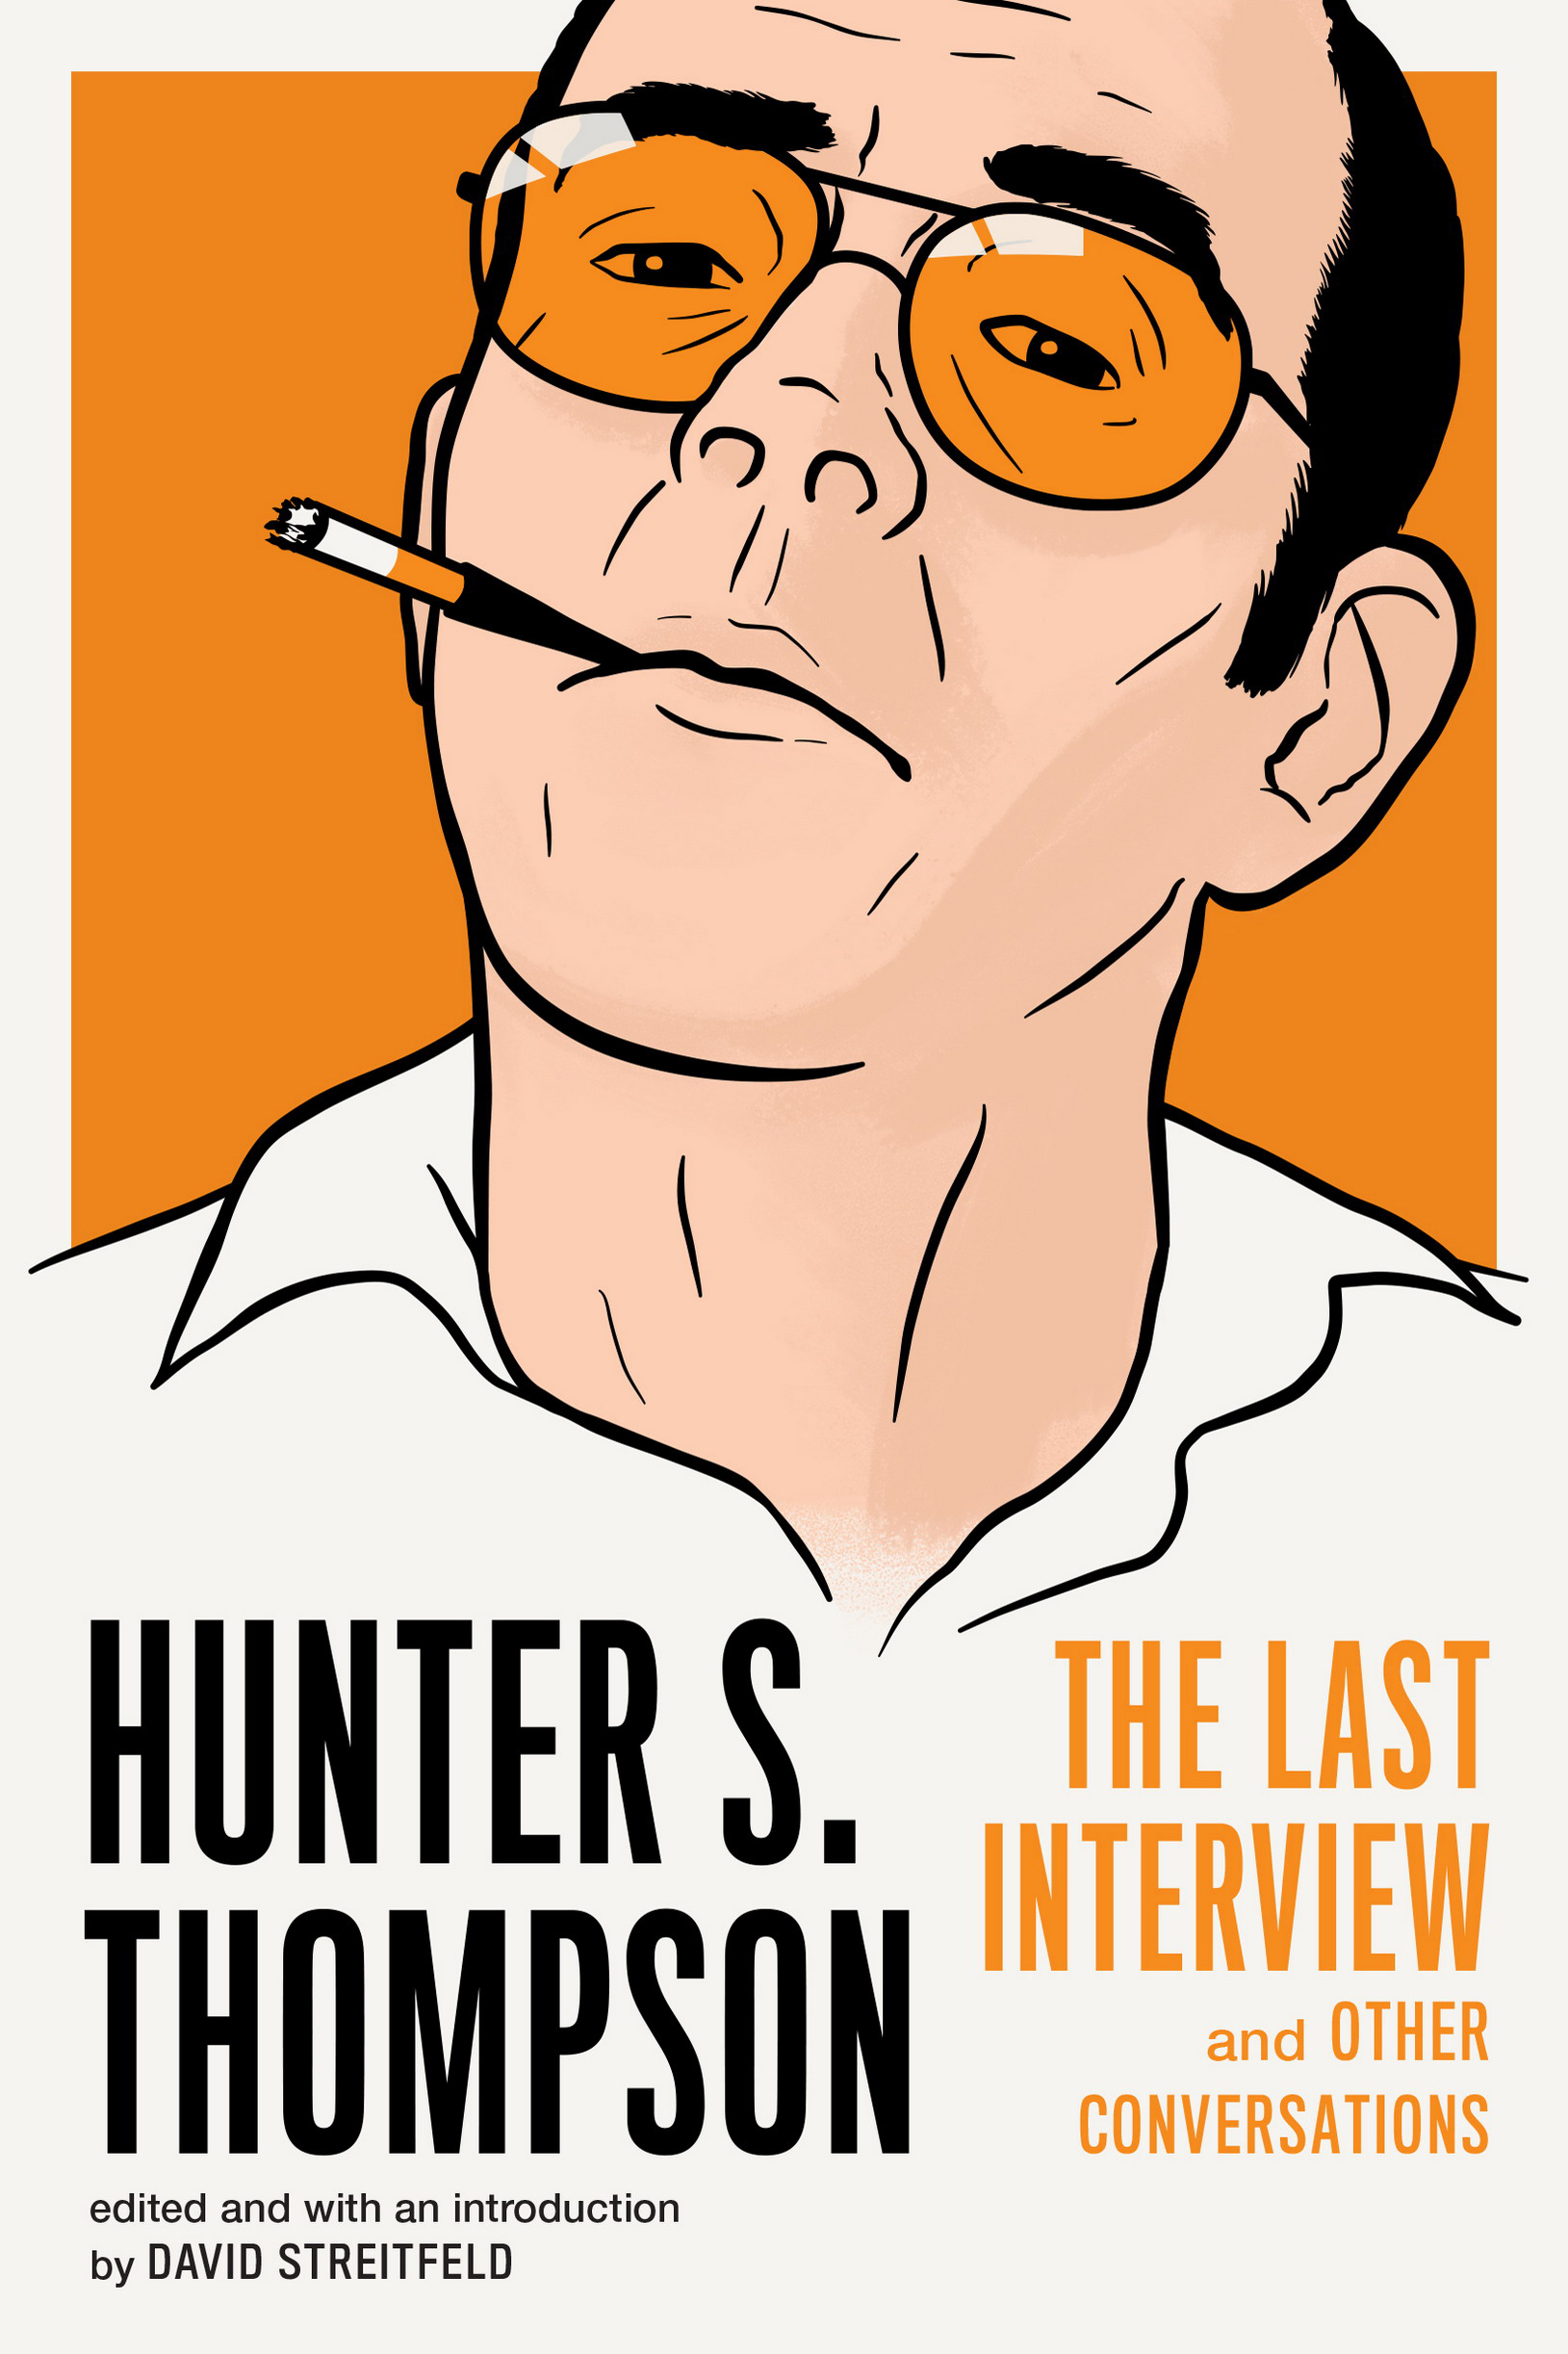 HUNTER S THOMPSON THE LAST INTERVIEW AND OTHER CONVERSATIONS Copyright 2018 - photo 1